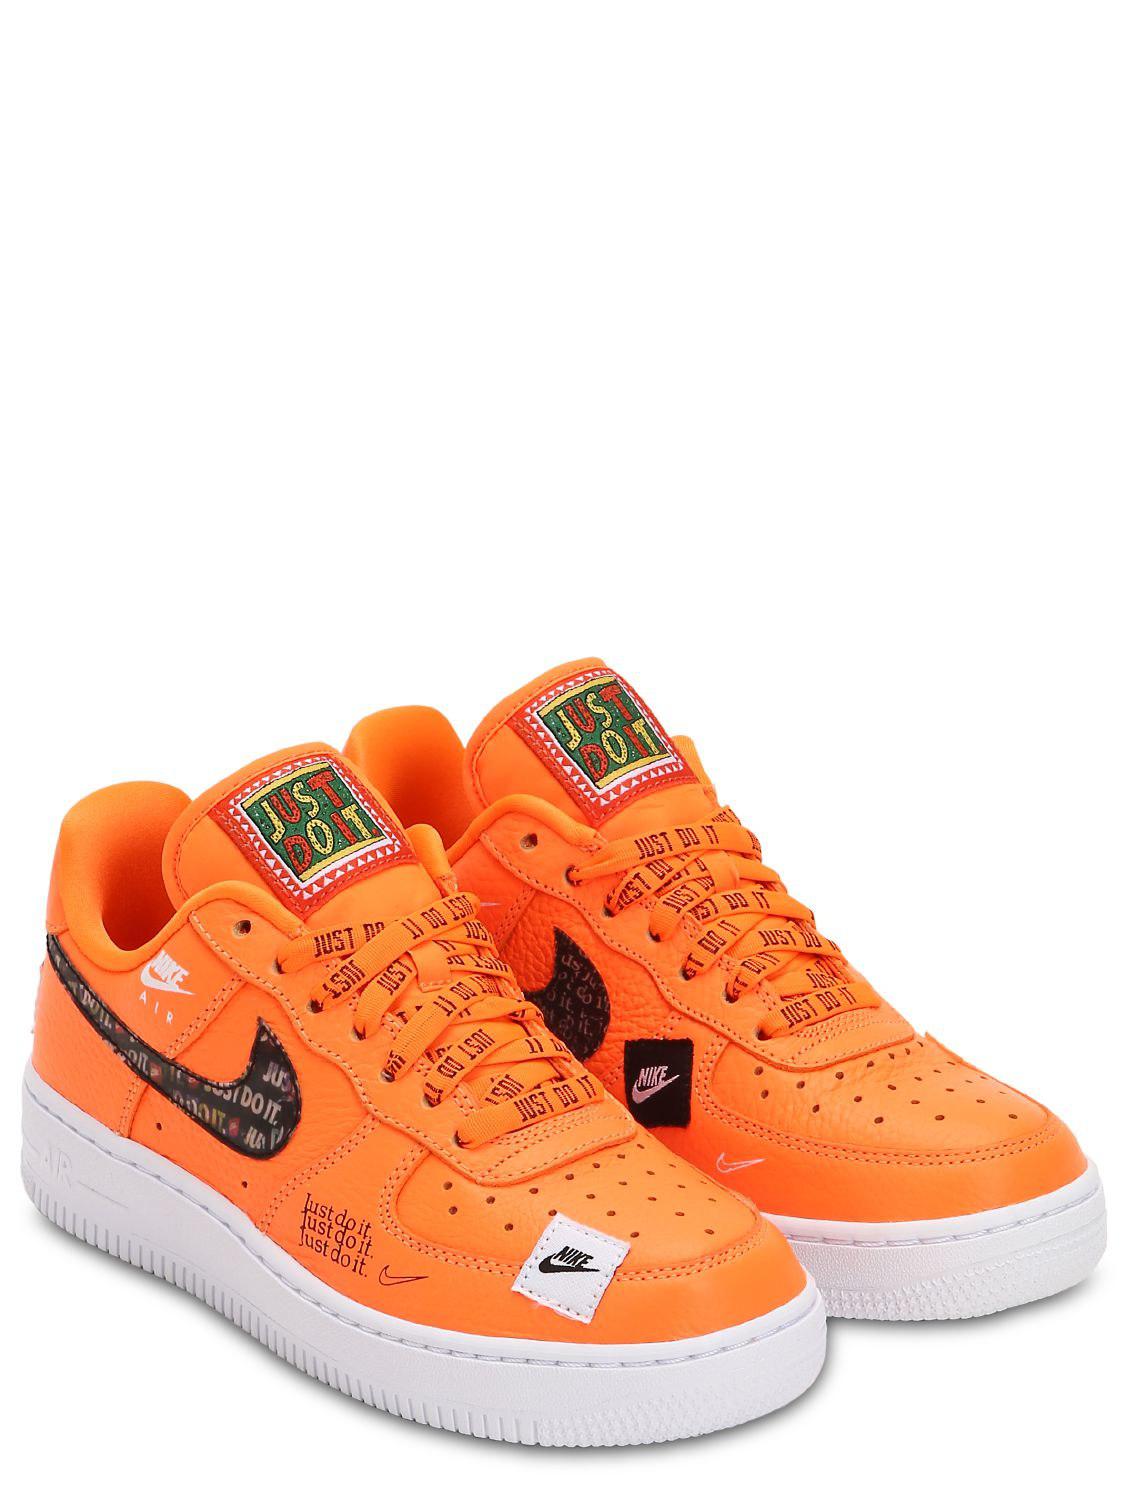 Nike Leather Air Force 1 Just Do It Sneakers in Orange - Lyst